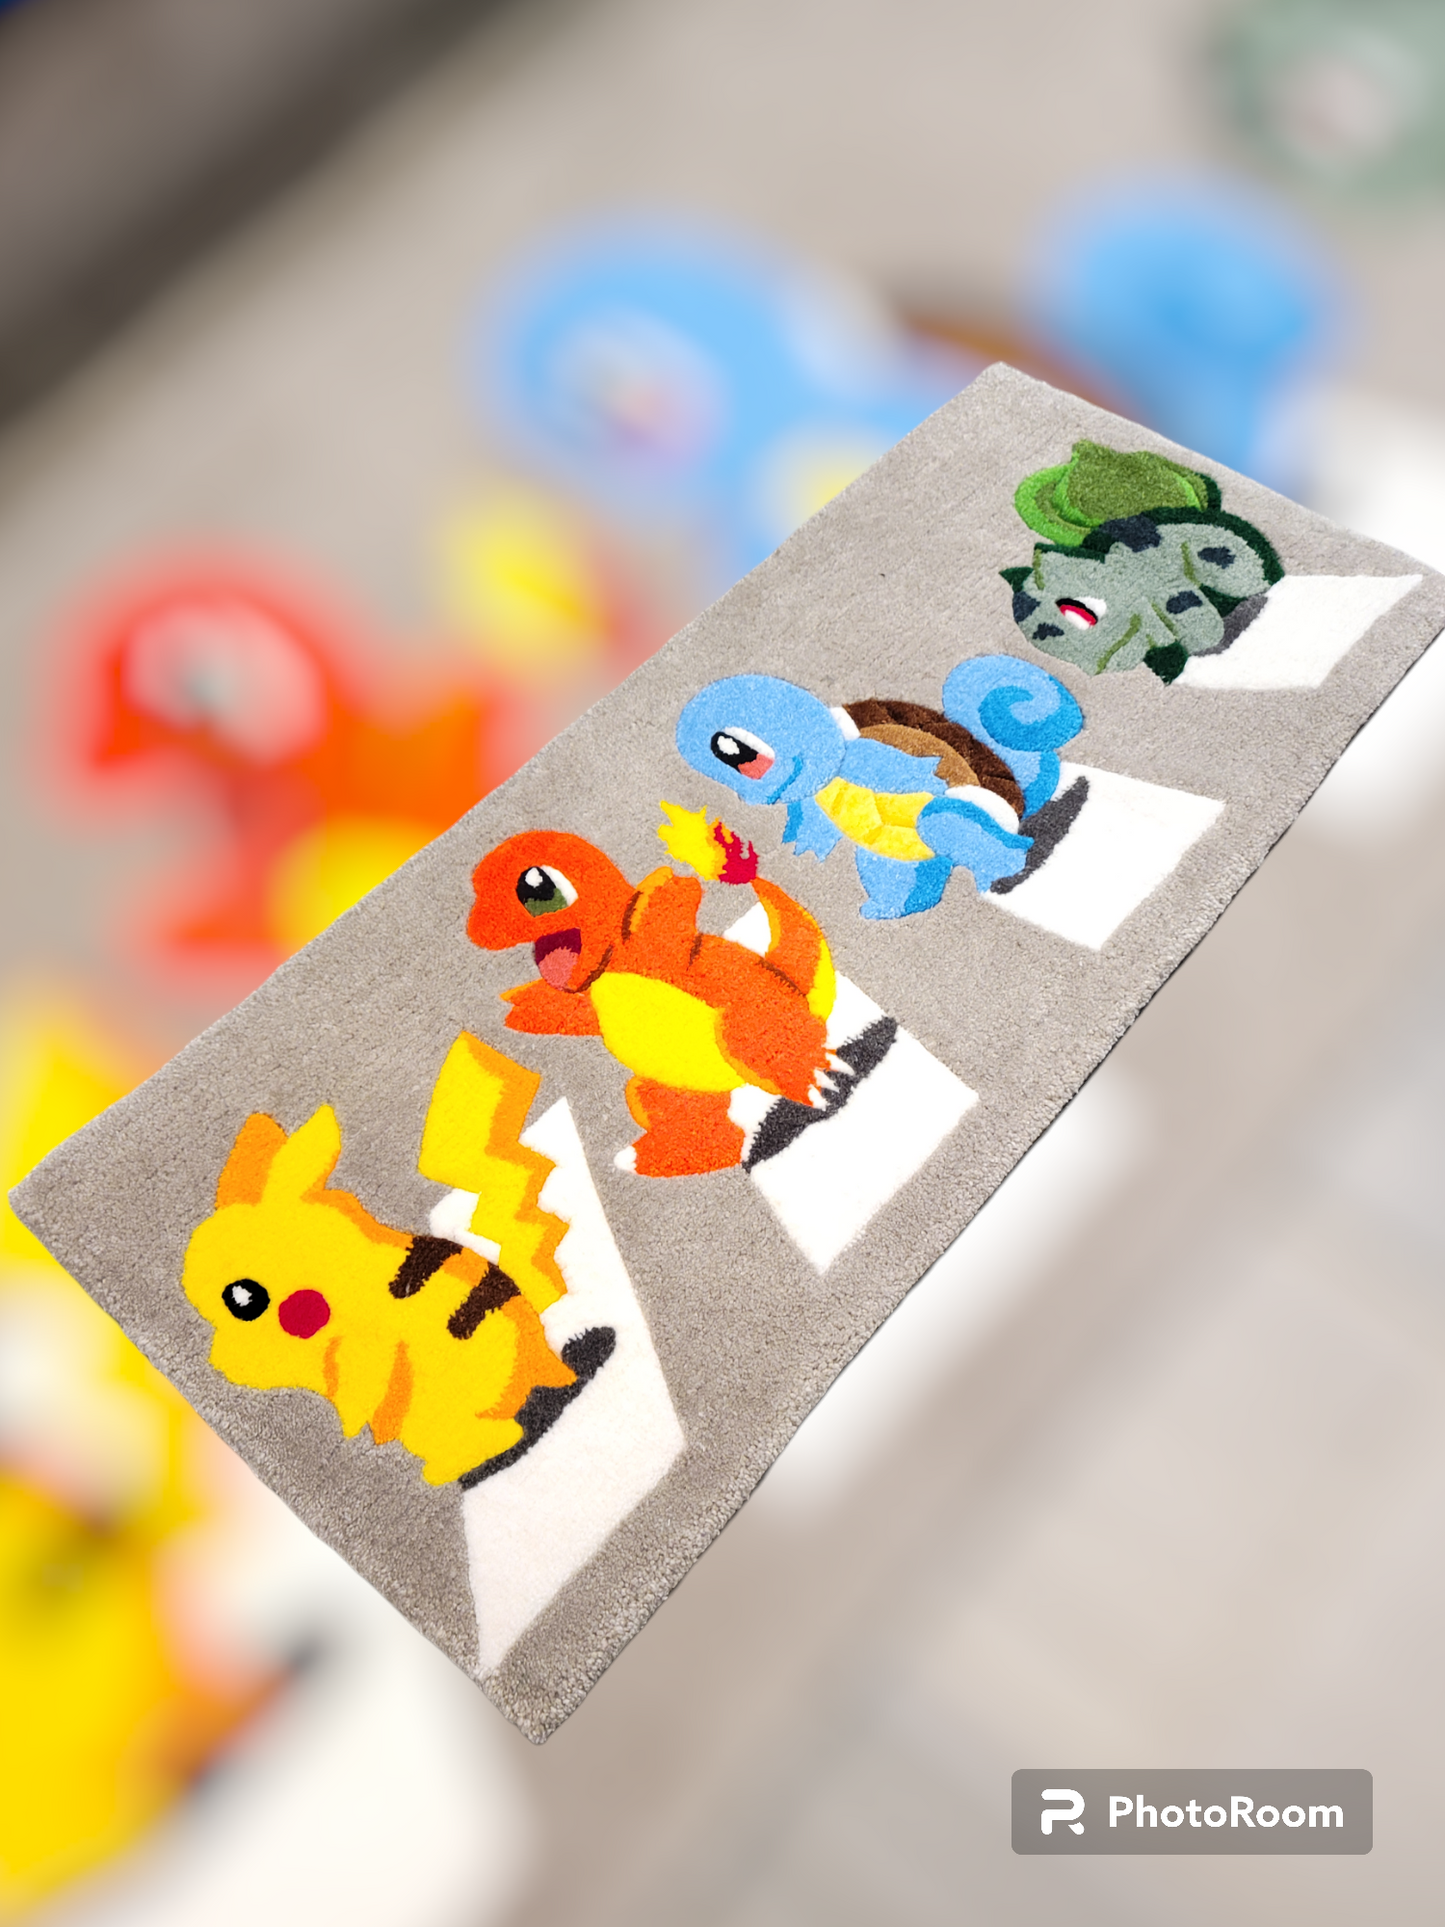 The Starters